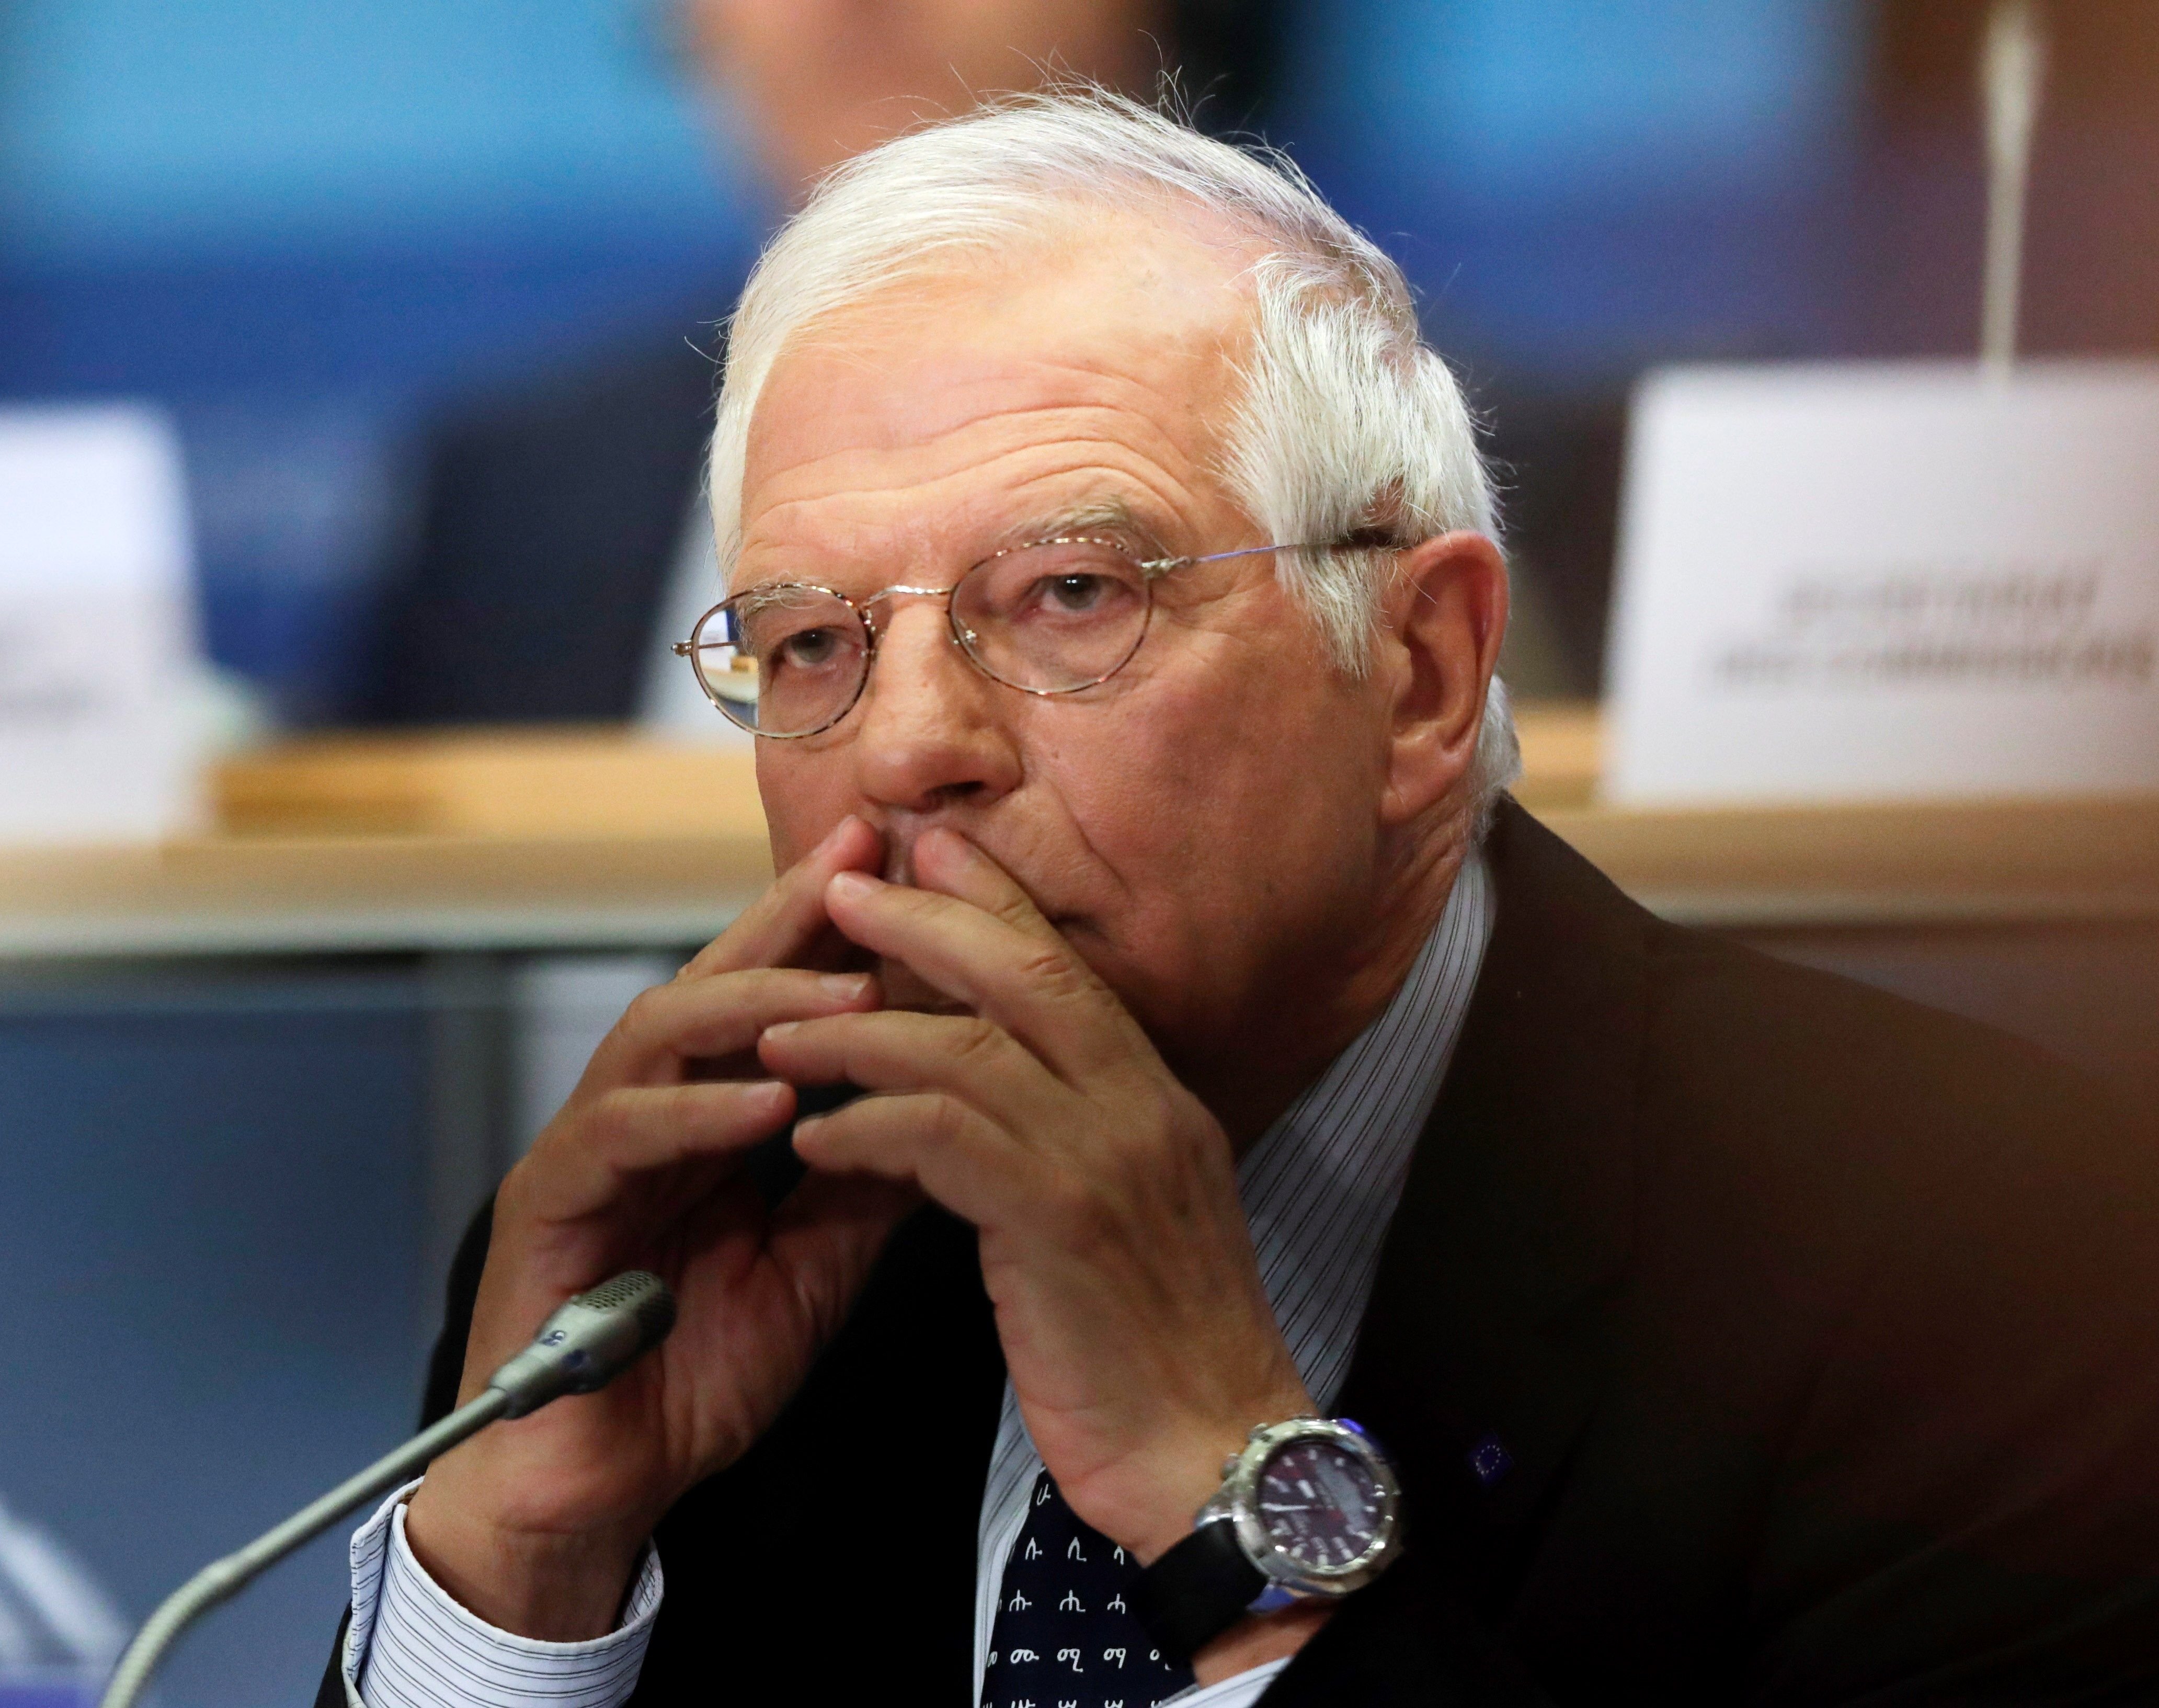 Borrell's European Parliament exam: questions on Catalonia, shares and an "unfortunate" expression